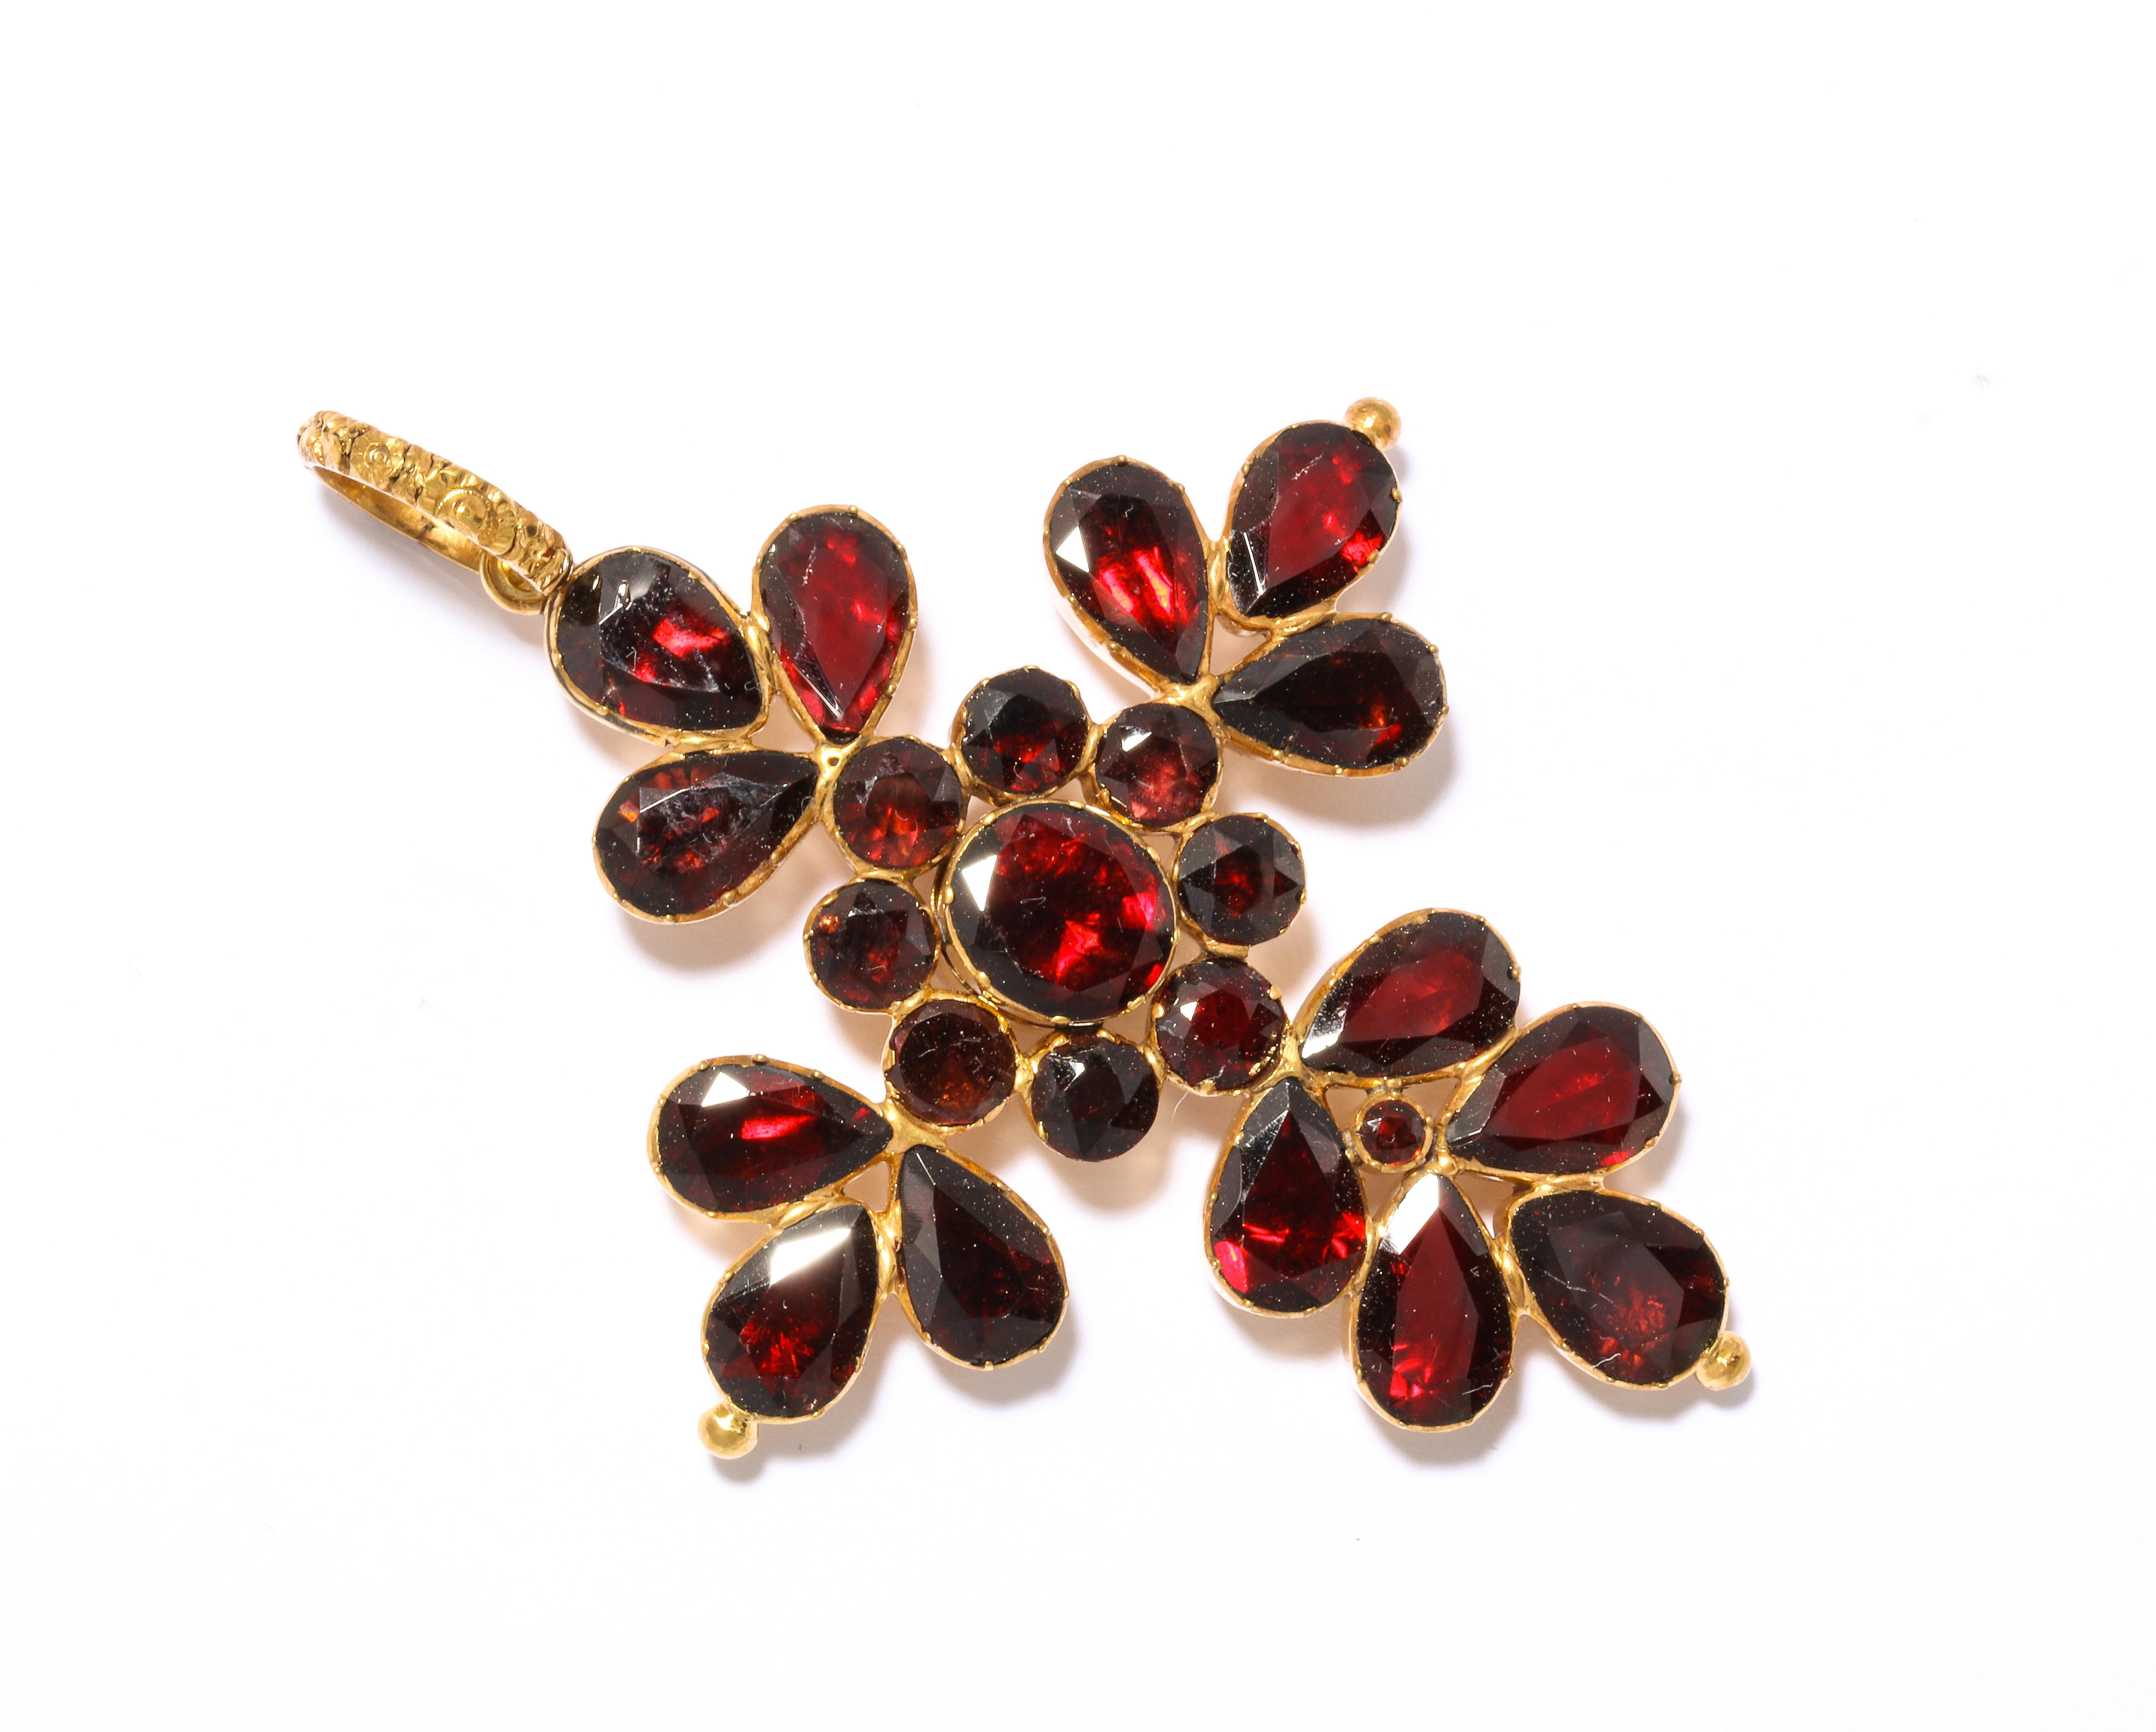 Georgian garnets are magnificent and these are true to the word gleaming in a pendant formed as a floral cross. A central flower is the focus while the oval garnets surrounding are petals. The back is typical Georgian beauty, round pillow backs that